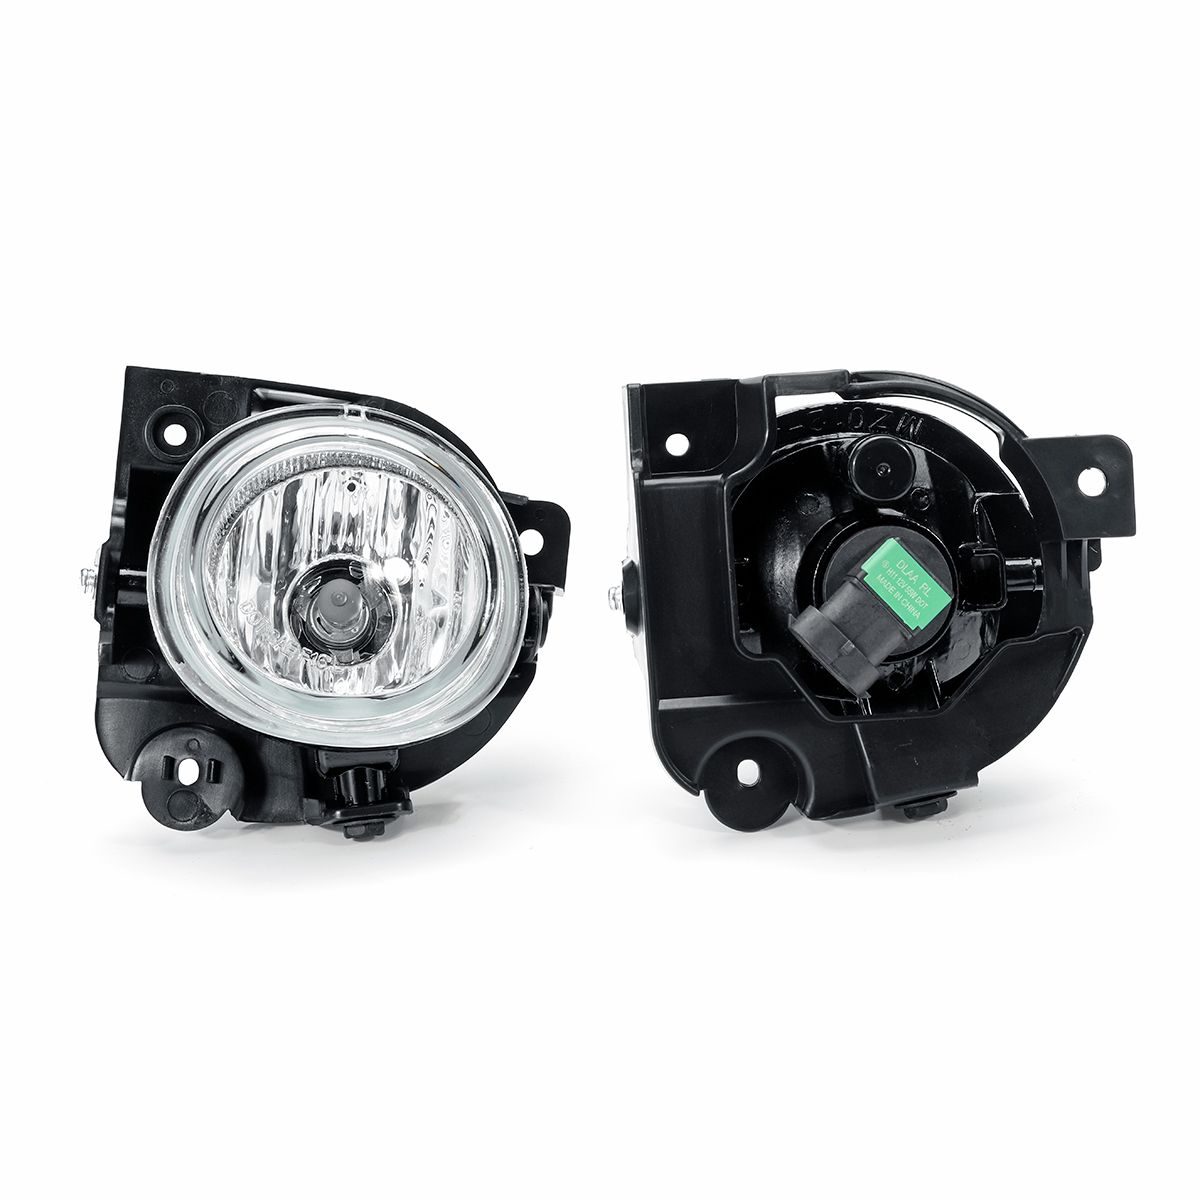 2Pcs-Car-Front-Bumper-Fog-Lights-Auto-Lamps--H11-Bulb-With-Covers-Wiring-Harness-Kit-For-Mazda-BT-50-1674207